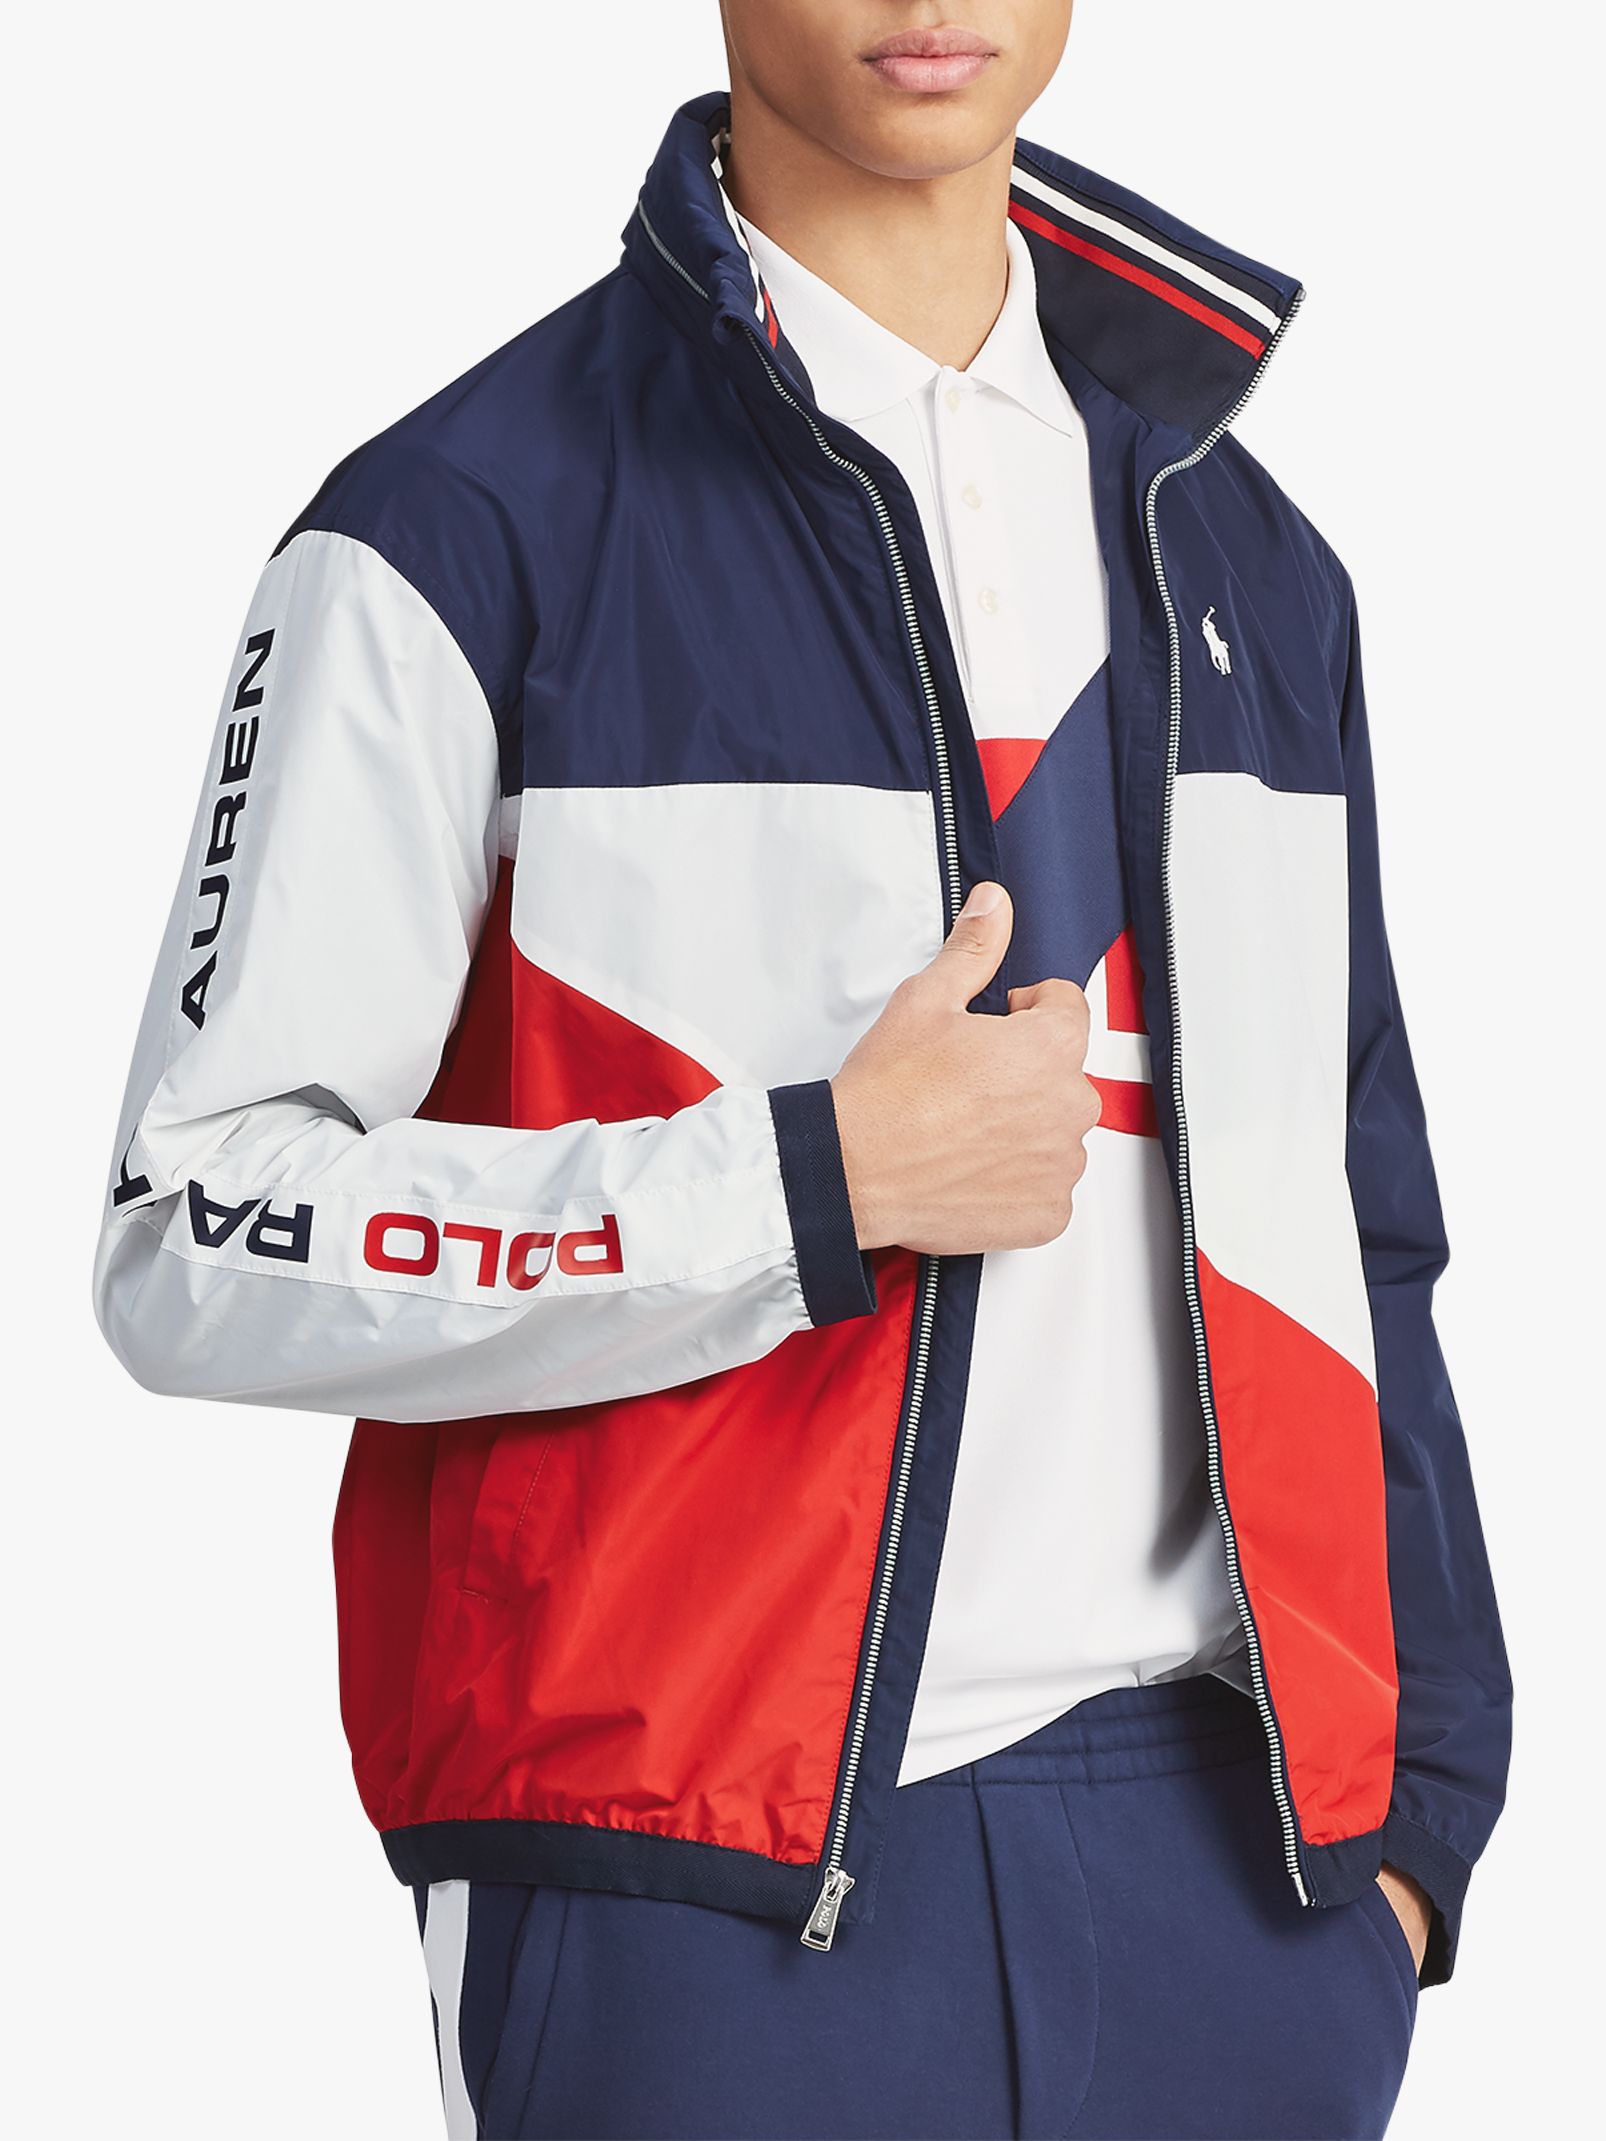 red and blue polo jacket